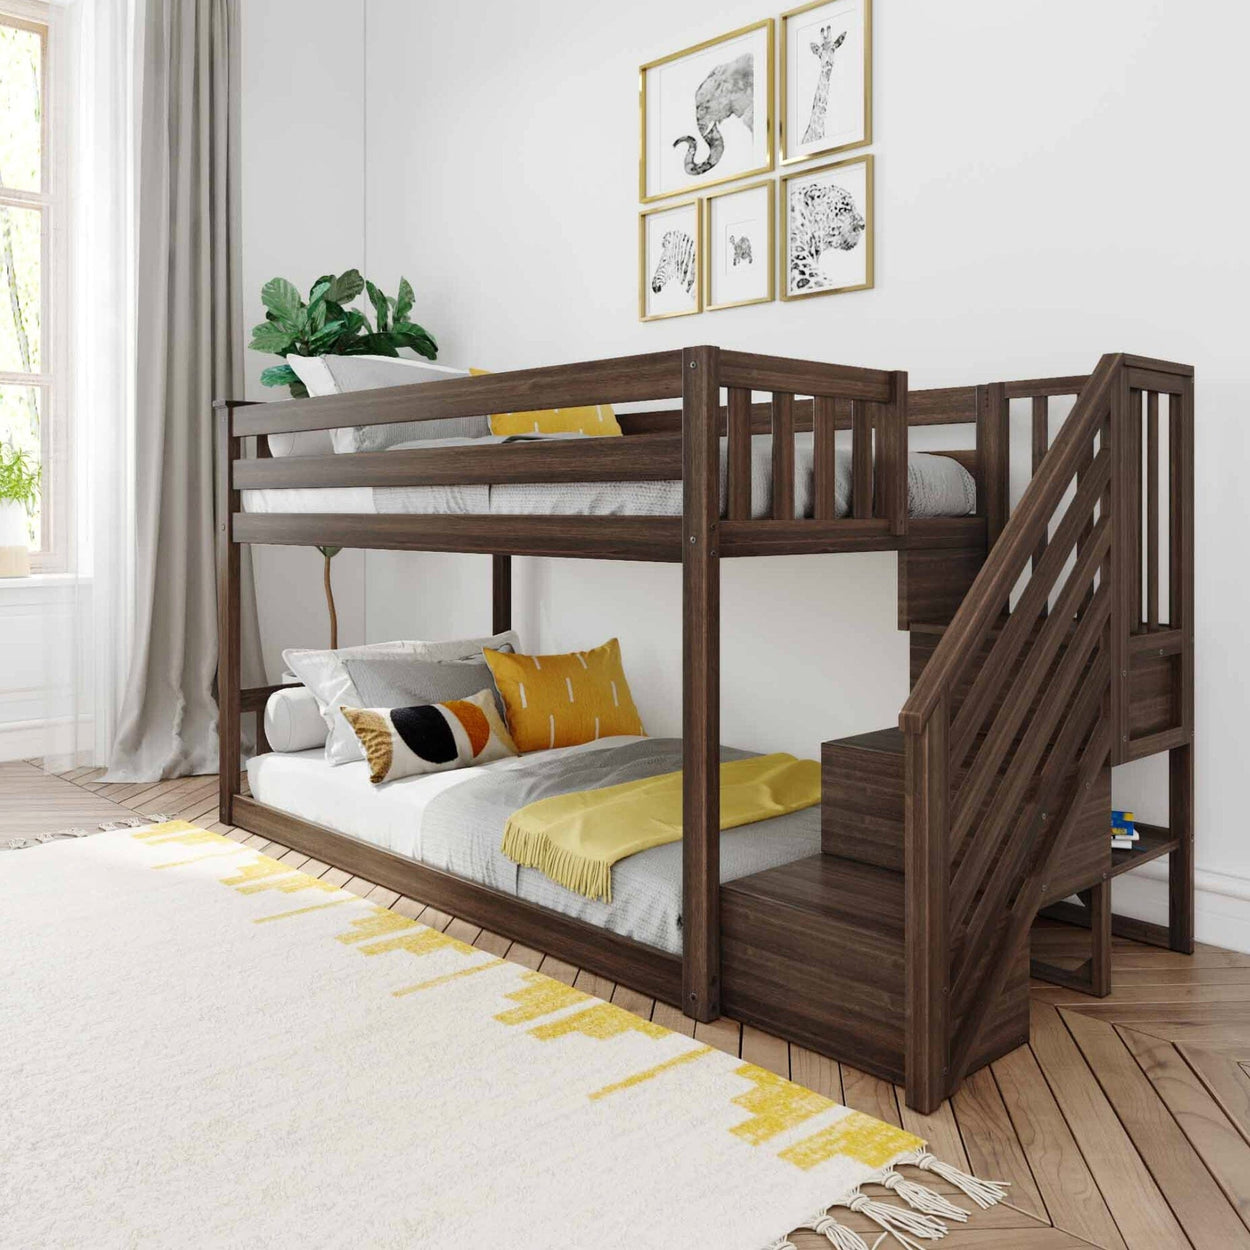 185220-008 : Bunk Beds Twin over Twin Low Bunk Bed with Staircase, Walnut